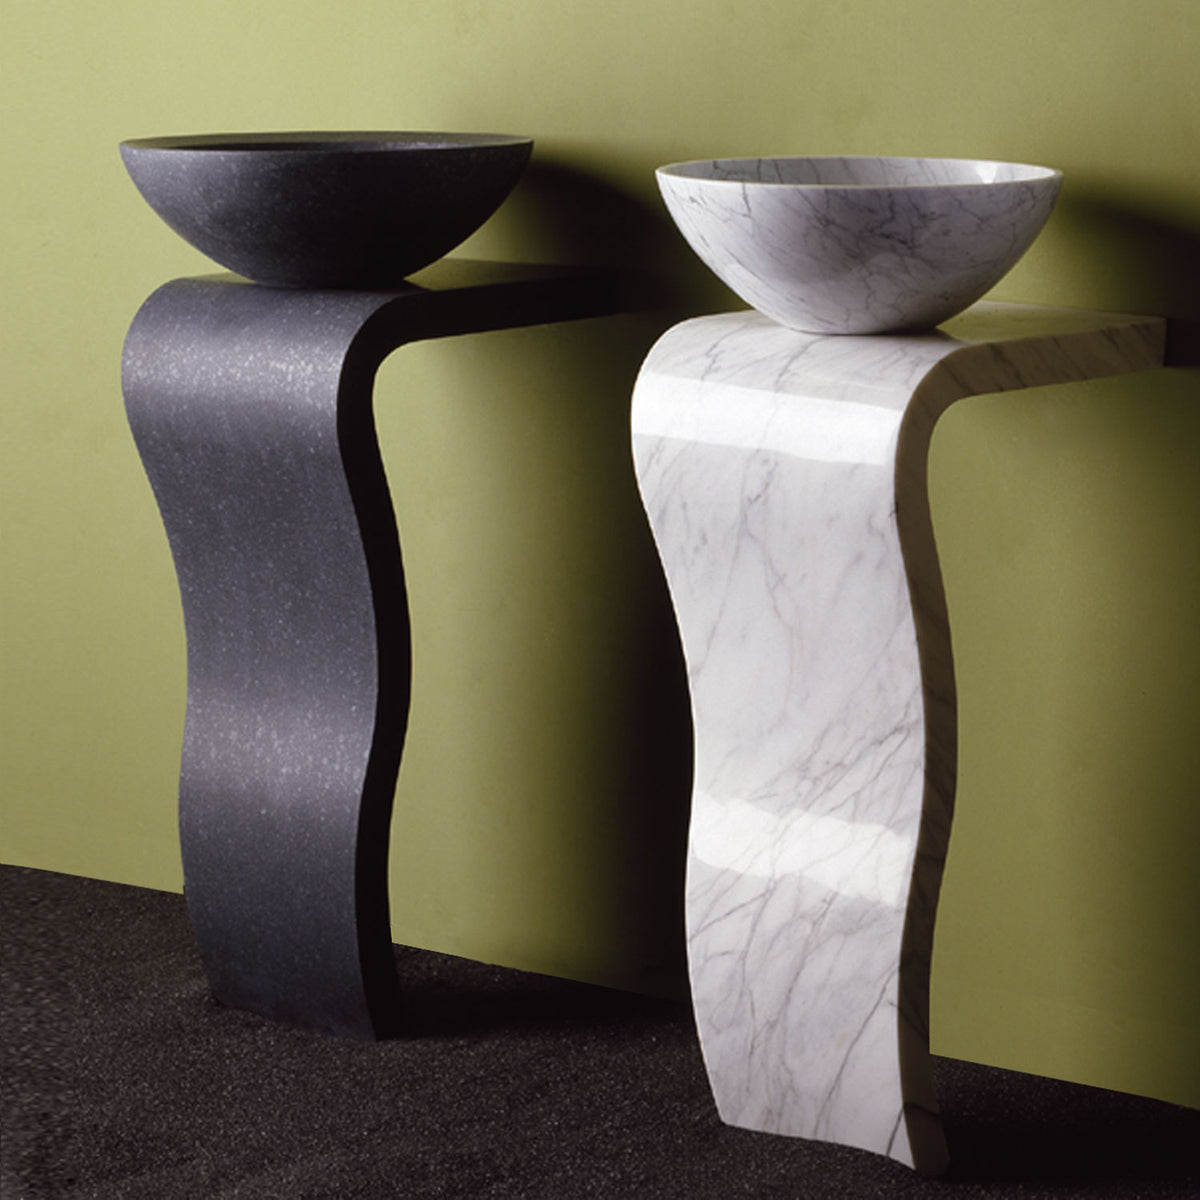 Two Stone Forest Wave Pedestals. One is honed basalt with Beveled Rim Vessel Sink and the other in polished carrara with the Urban Vessel sink. Both carved from a solid block of stone. image 1 of 3